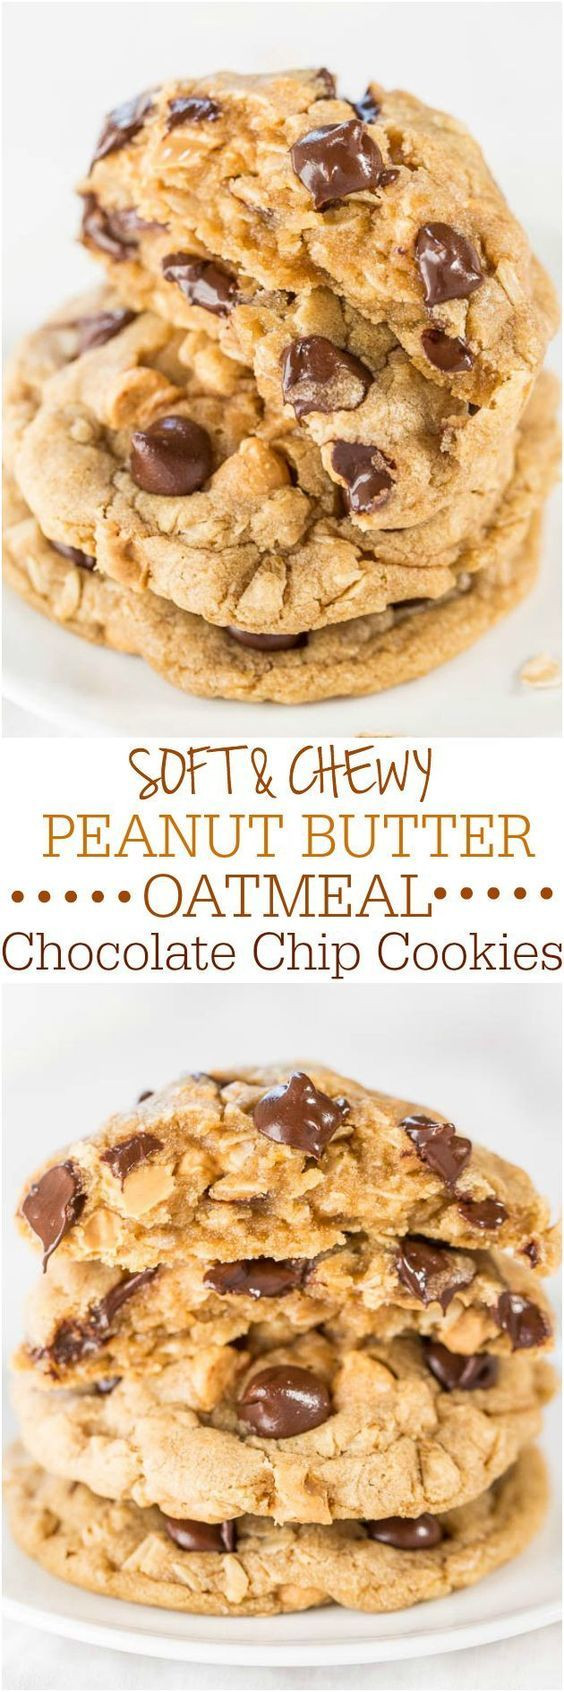 Soft Peanut Butter Chocolate Chip Cookies
 Soft and Chewy Peanut Butter Oatmeal Chocolate Chip